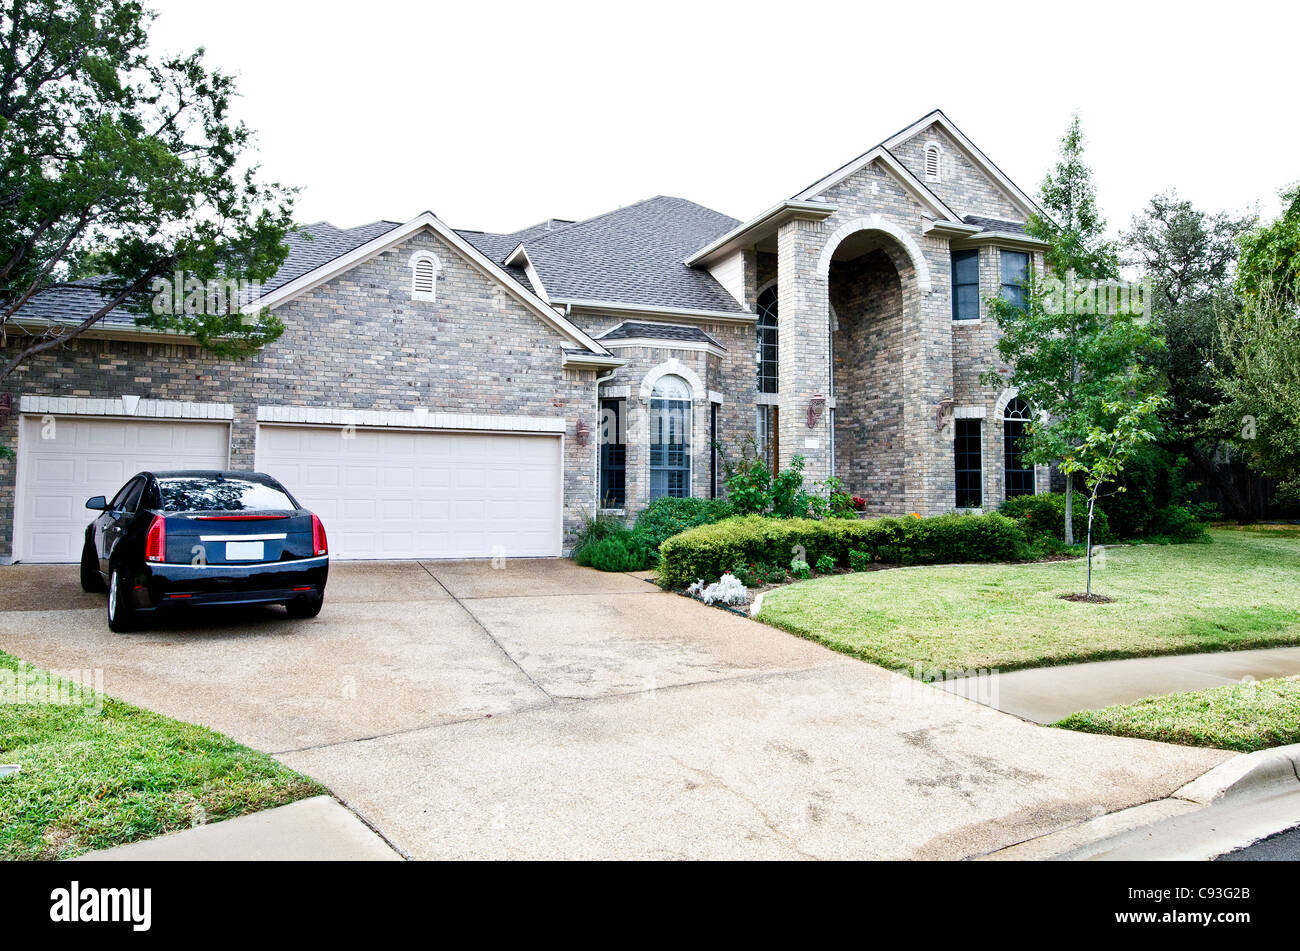 Front view of an upscale house and car in the driveway Stock Photo